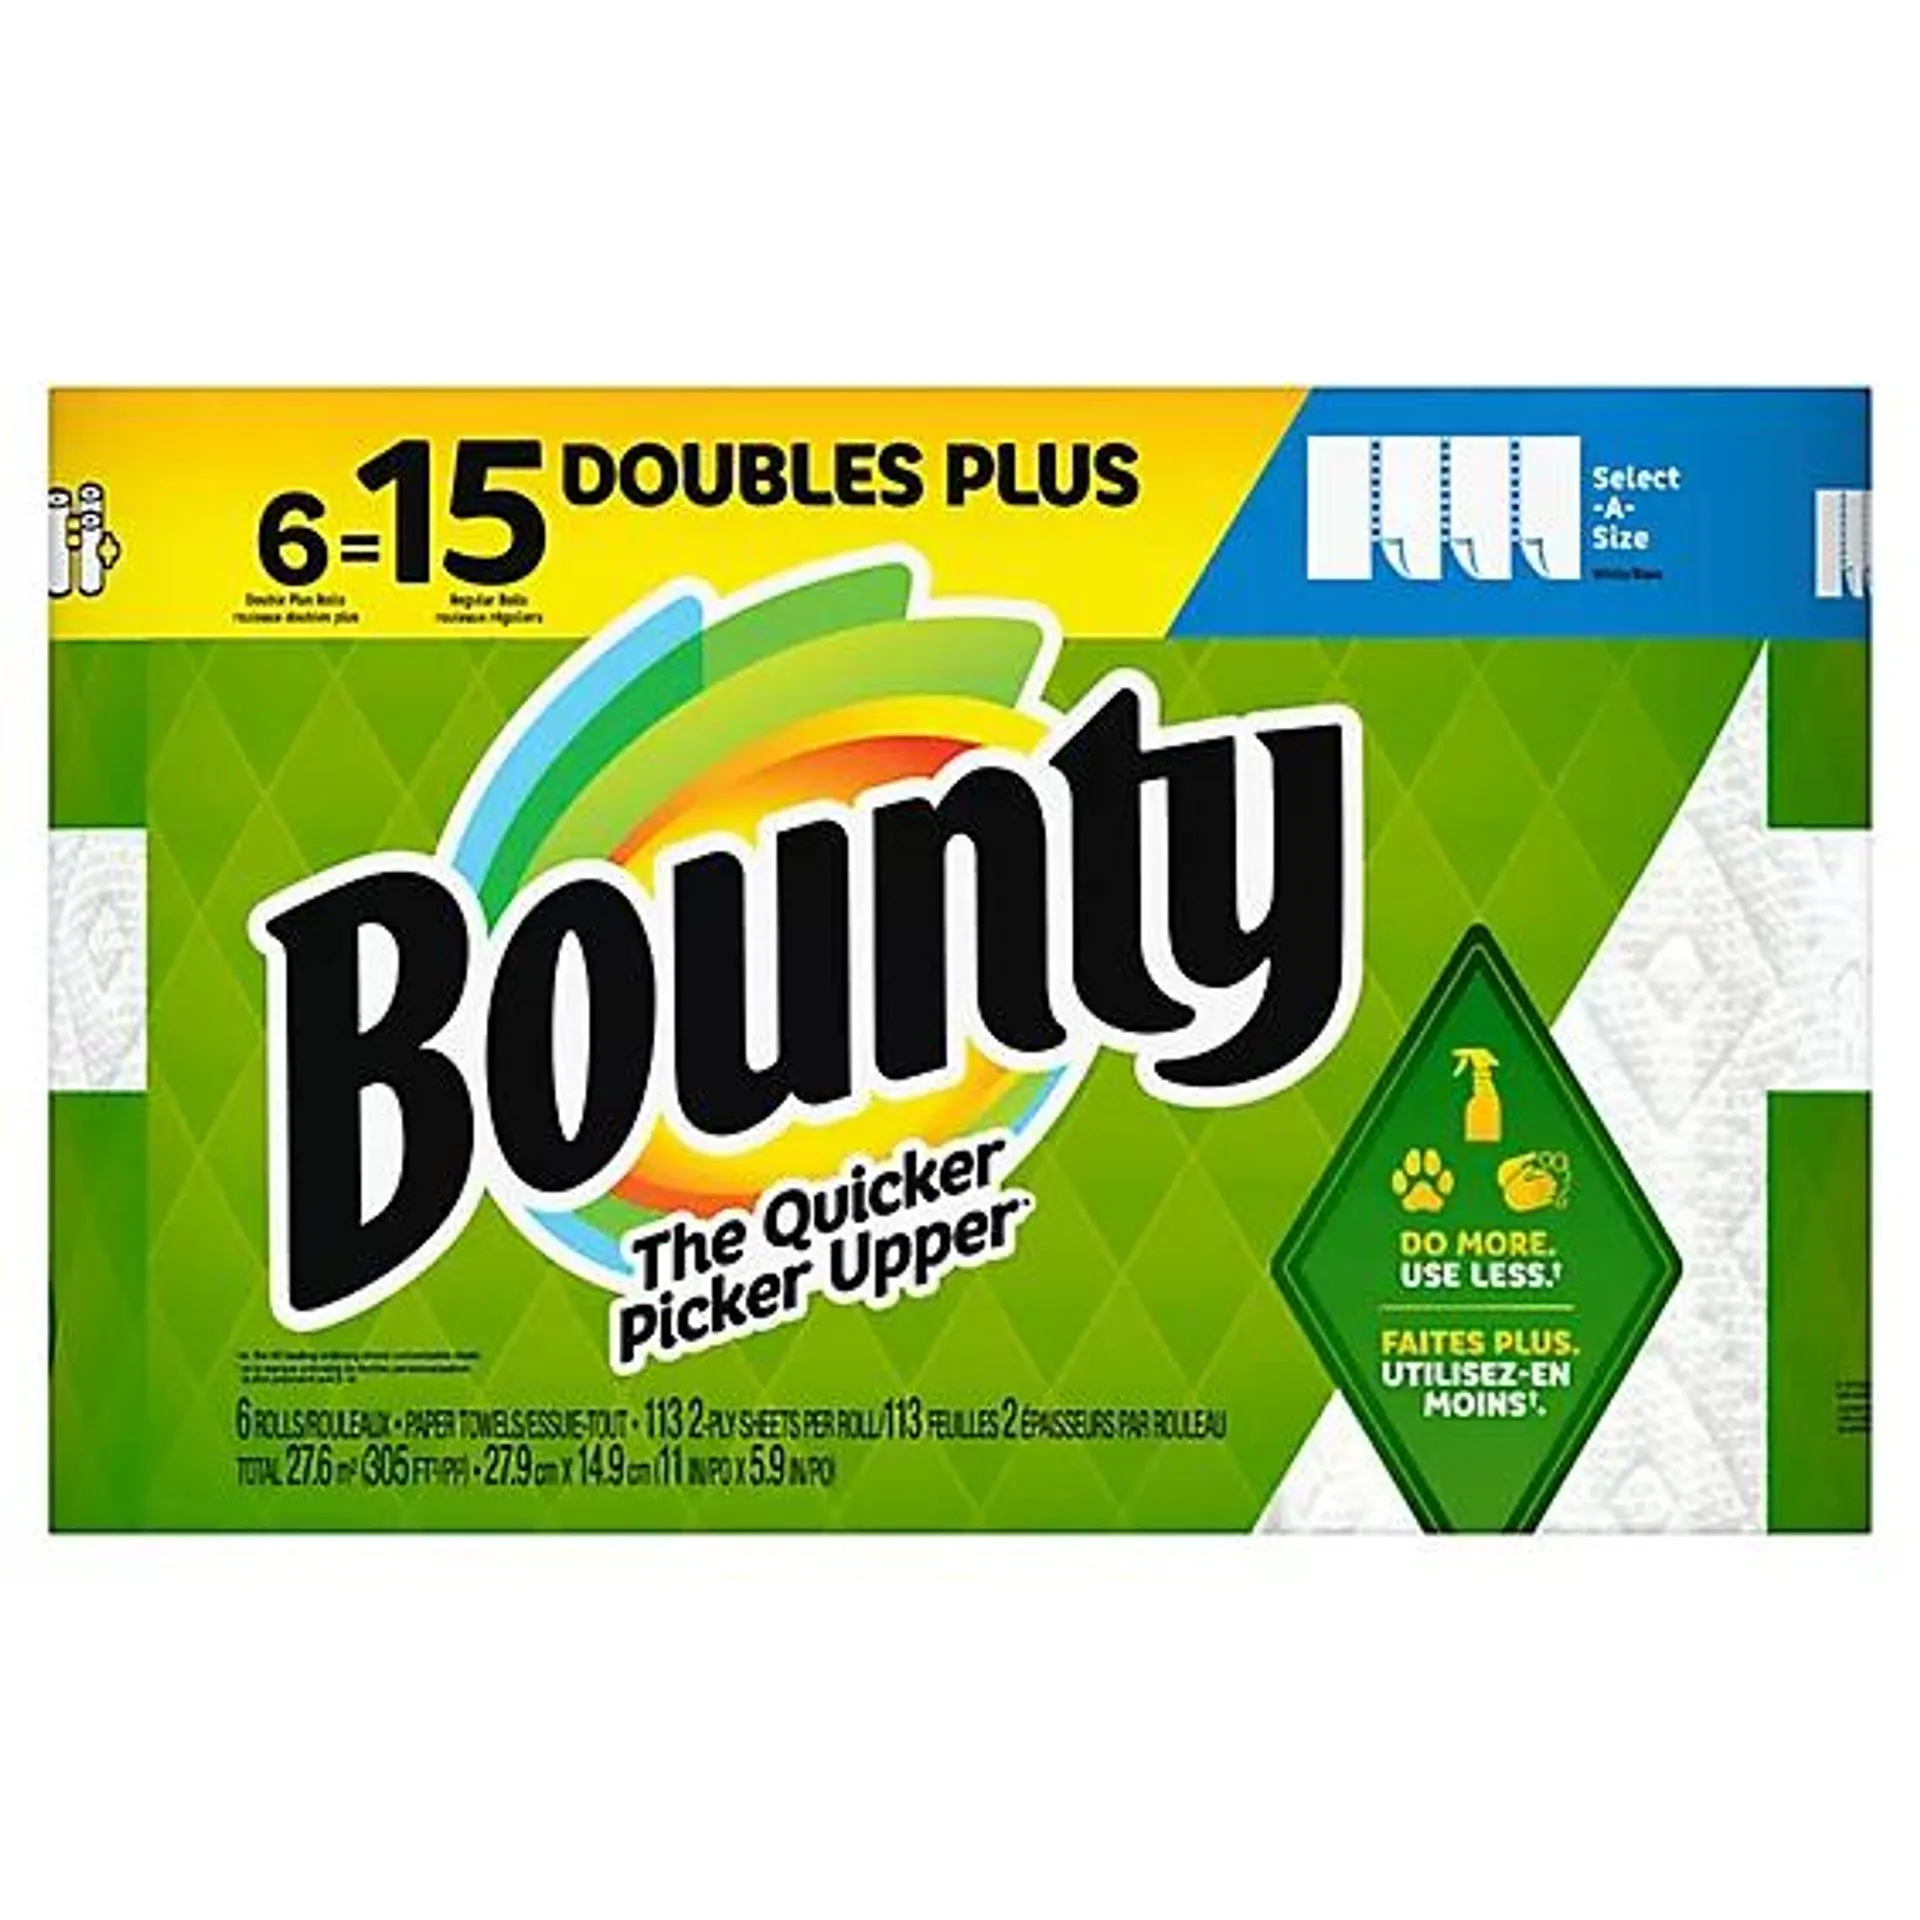 Bounty 6 Double Plus Select A Size White Tissue - 6 Count